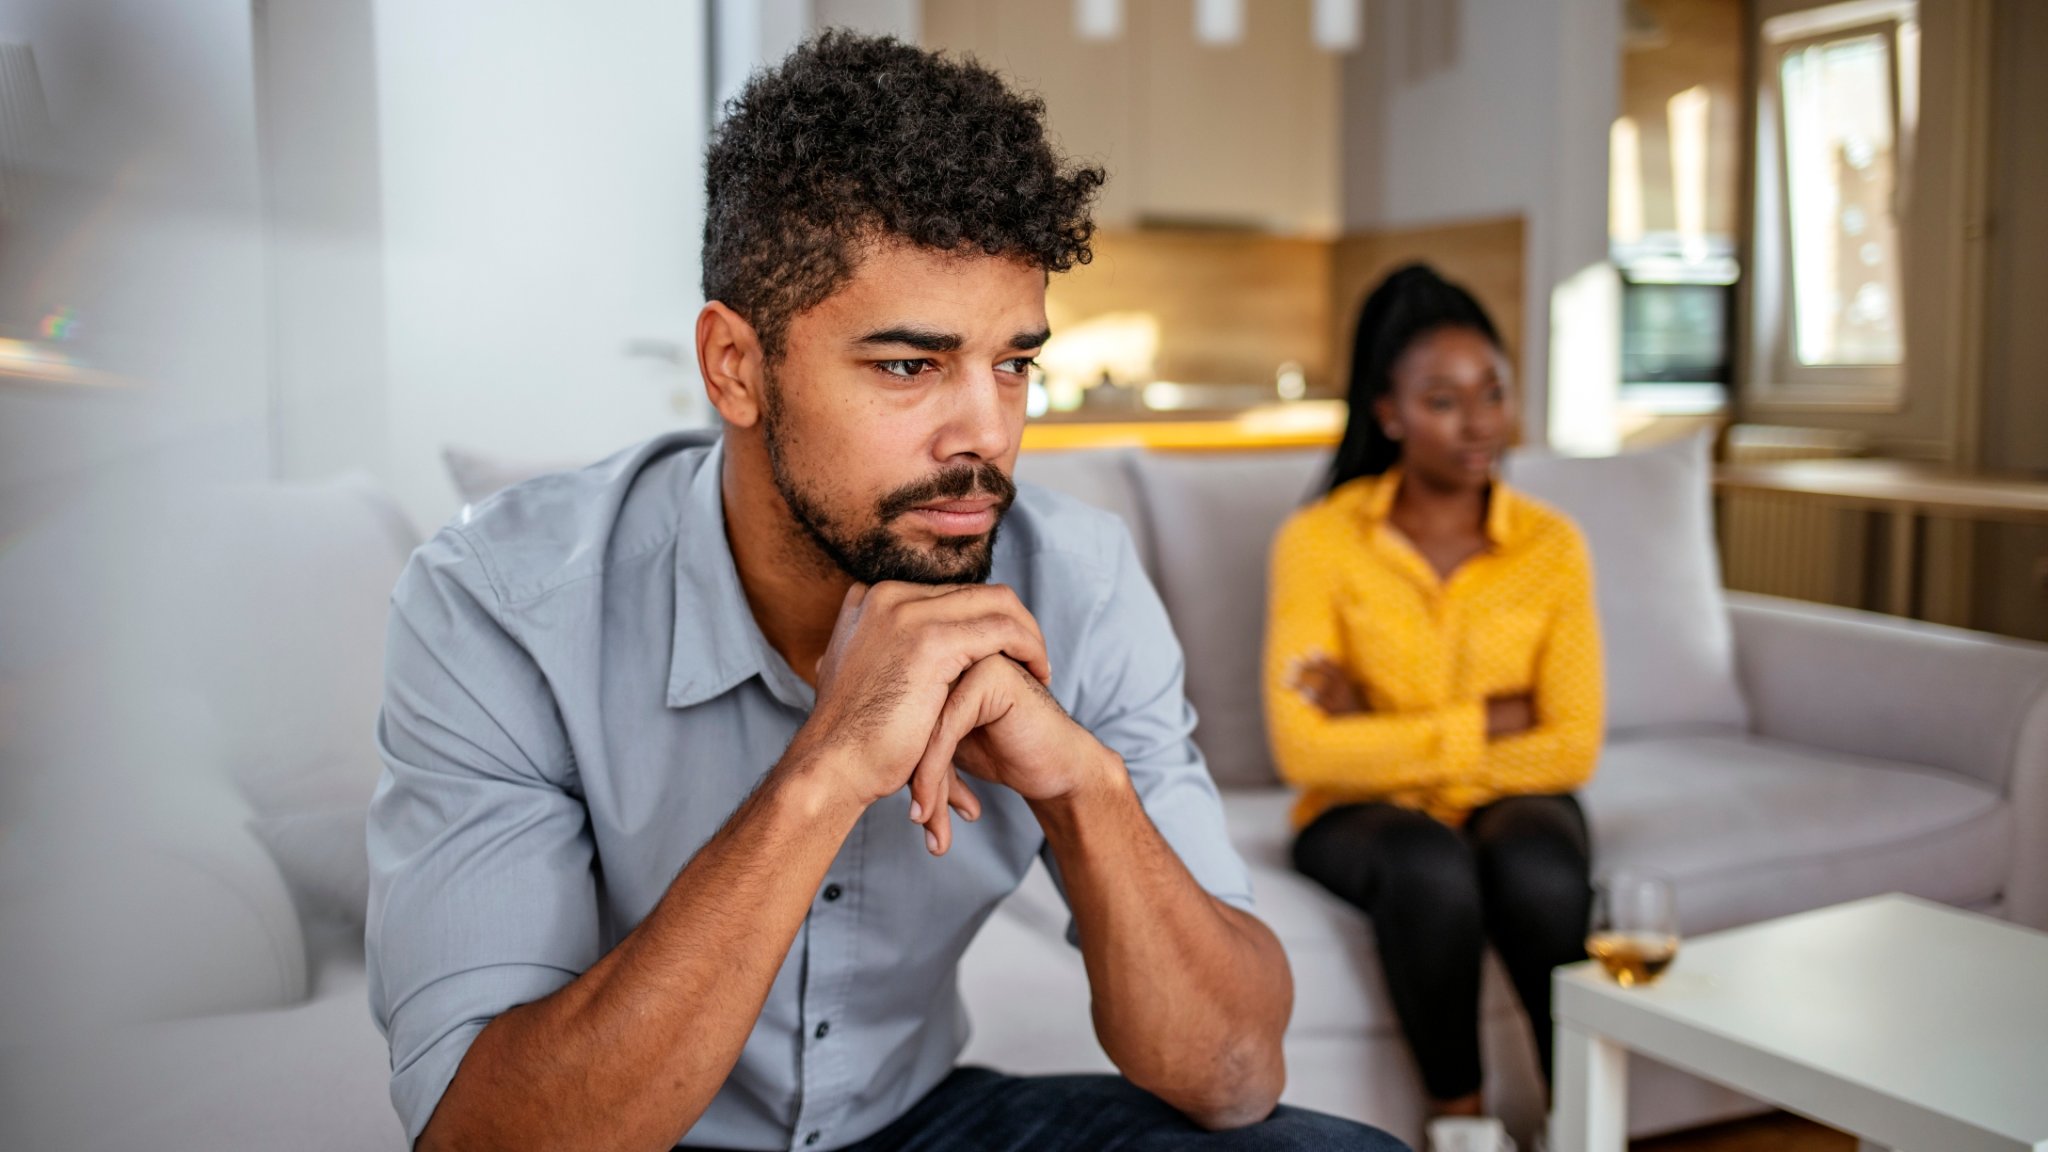 8 Ways Partners Can Reconnect If This Year Has Brought Up Some Relationship Struggles